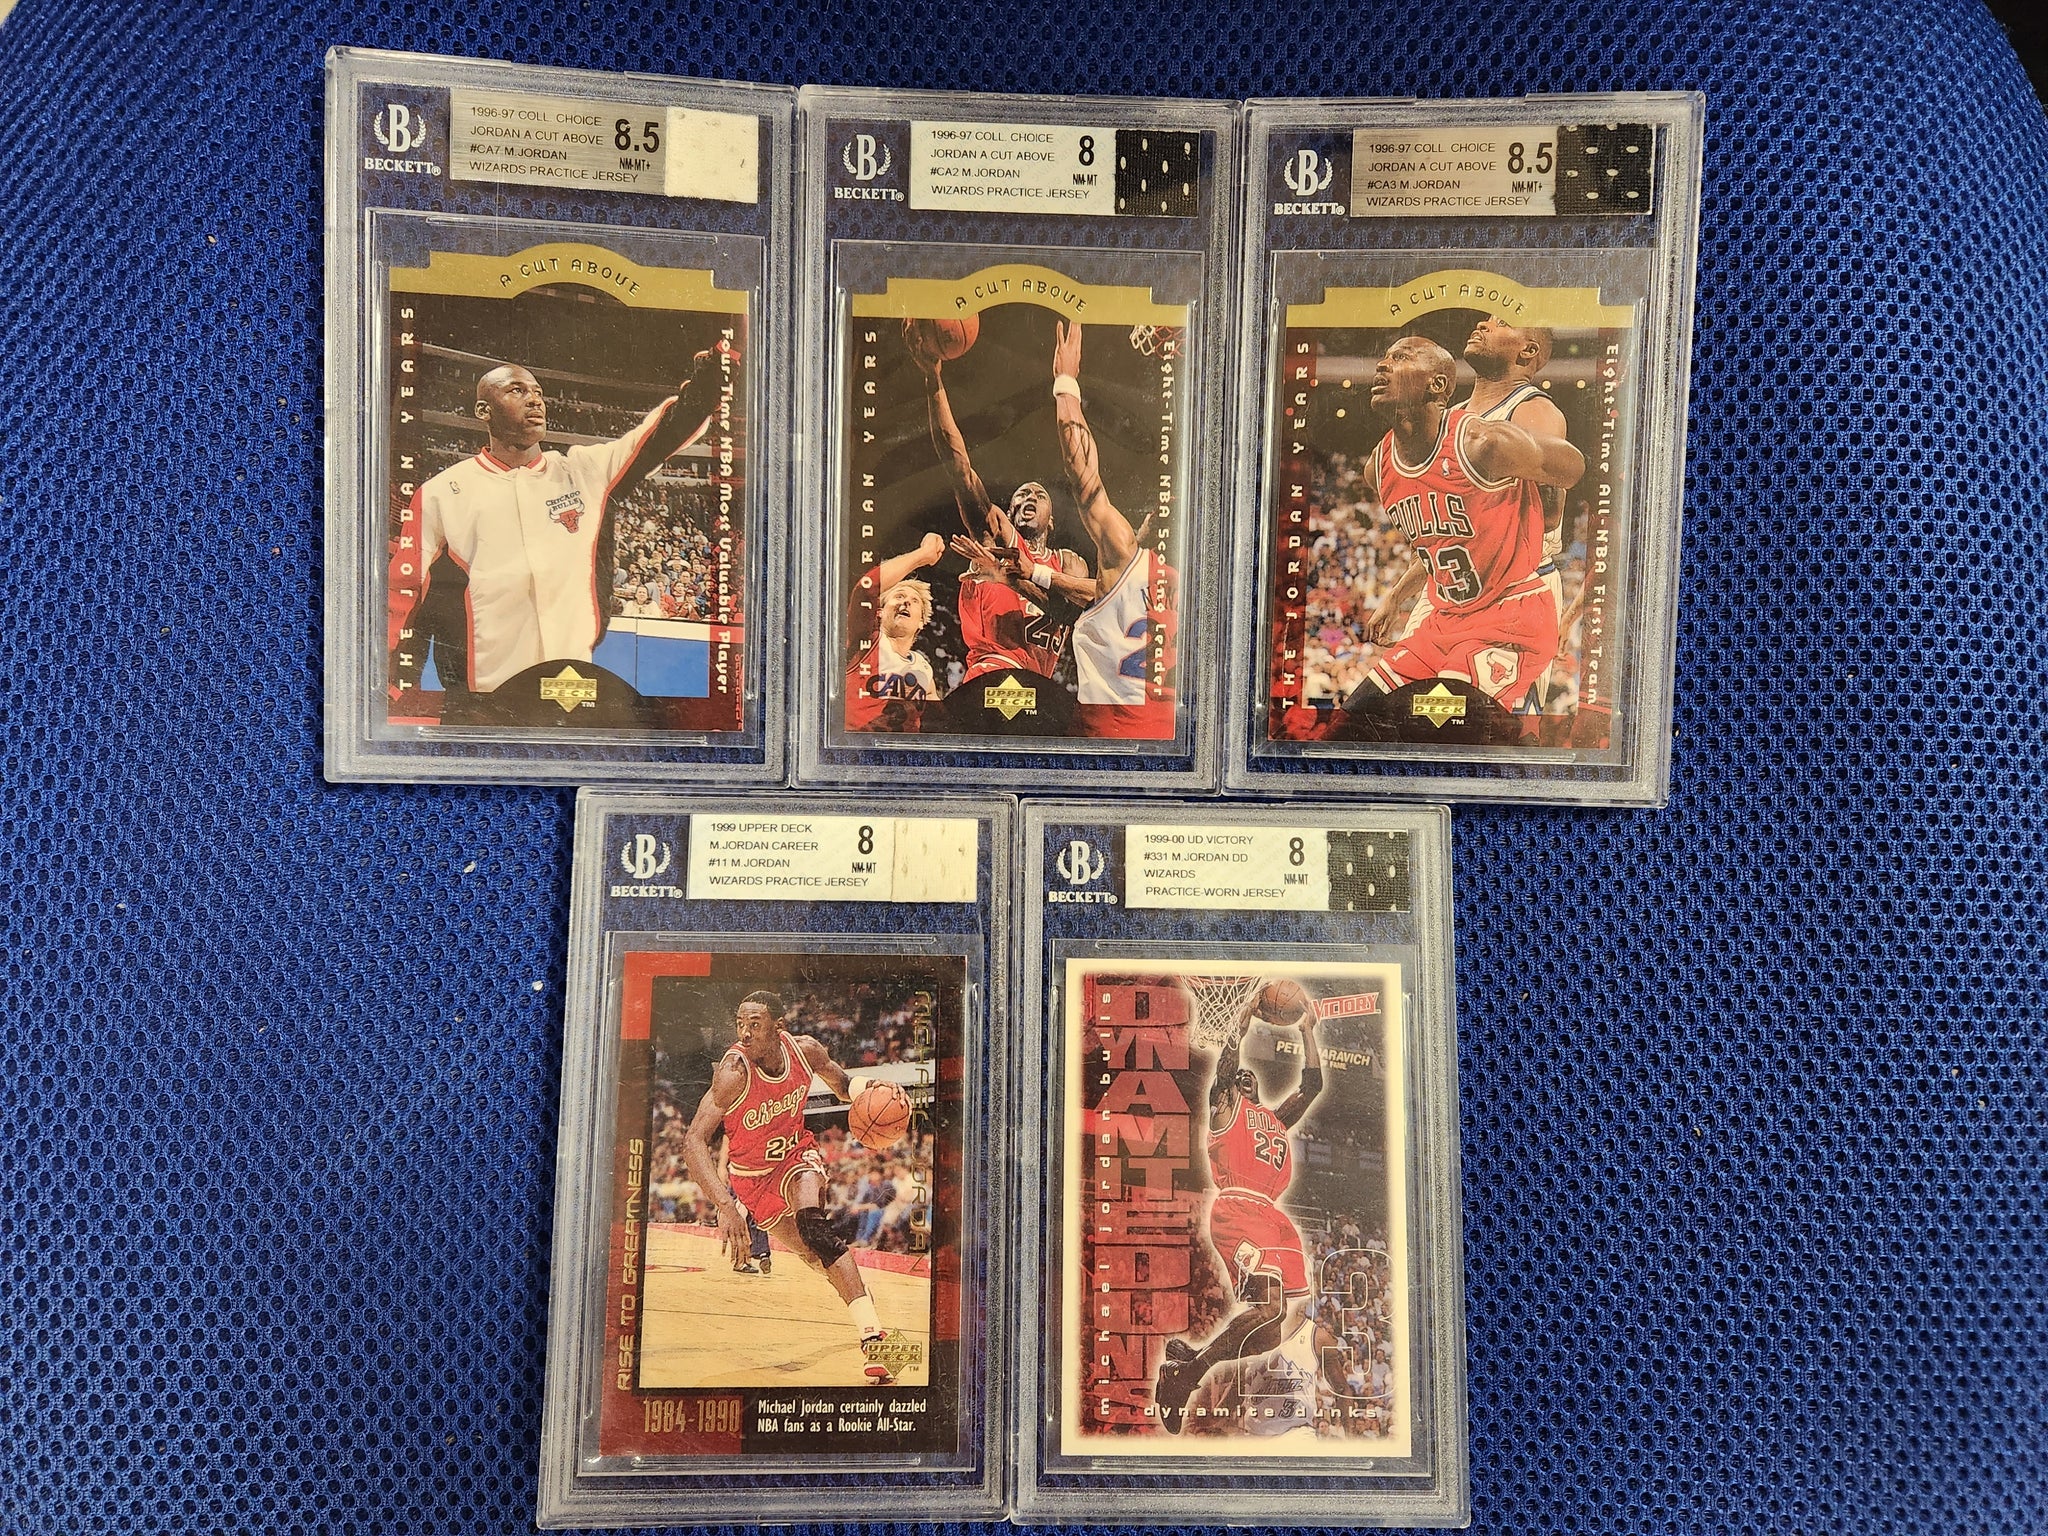 Michael Jordan Certified Washington Wizards Practice Worn Warm Up Jersey with Card BGS Beckett Grading Services Verified ang Graded 8 to 8.5 (Randomly Selected, You Will Receive 1 at Random From the Picture)